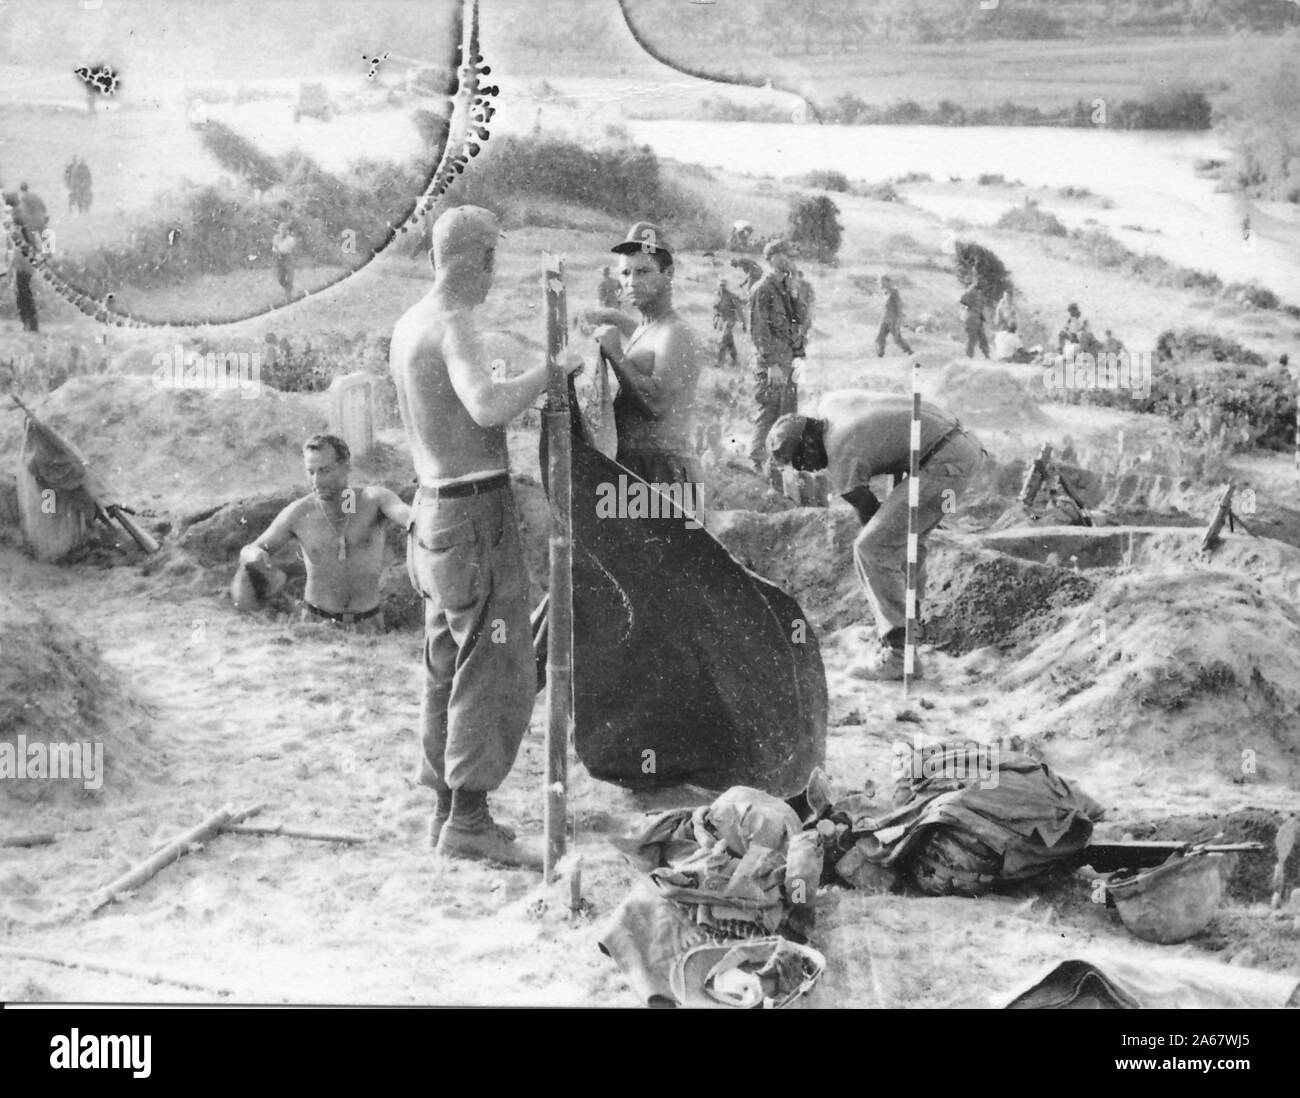 A group of uniformed and shirtless American soldiers dig trenches and organize other fortifications, while preparing a camp on an open hillside on a sunny day, Vietnam, 1965. () Stock Photo